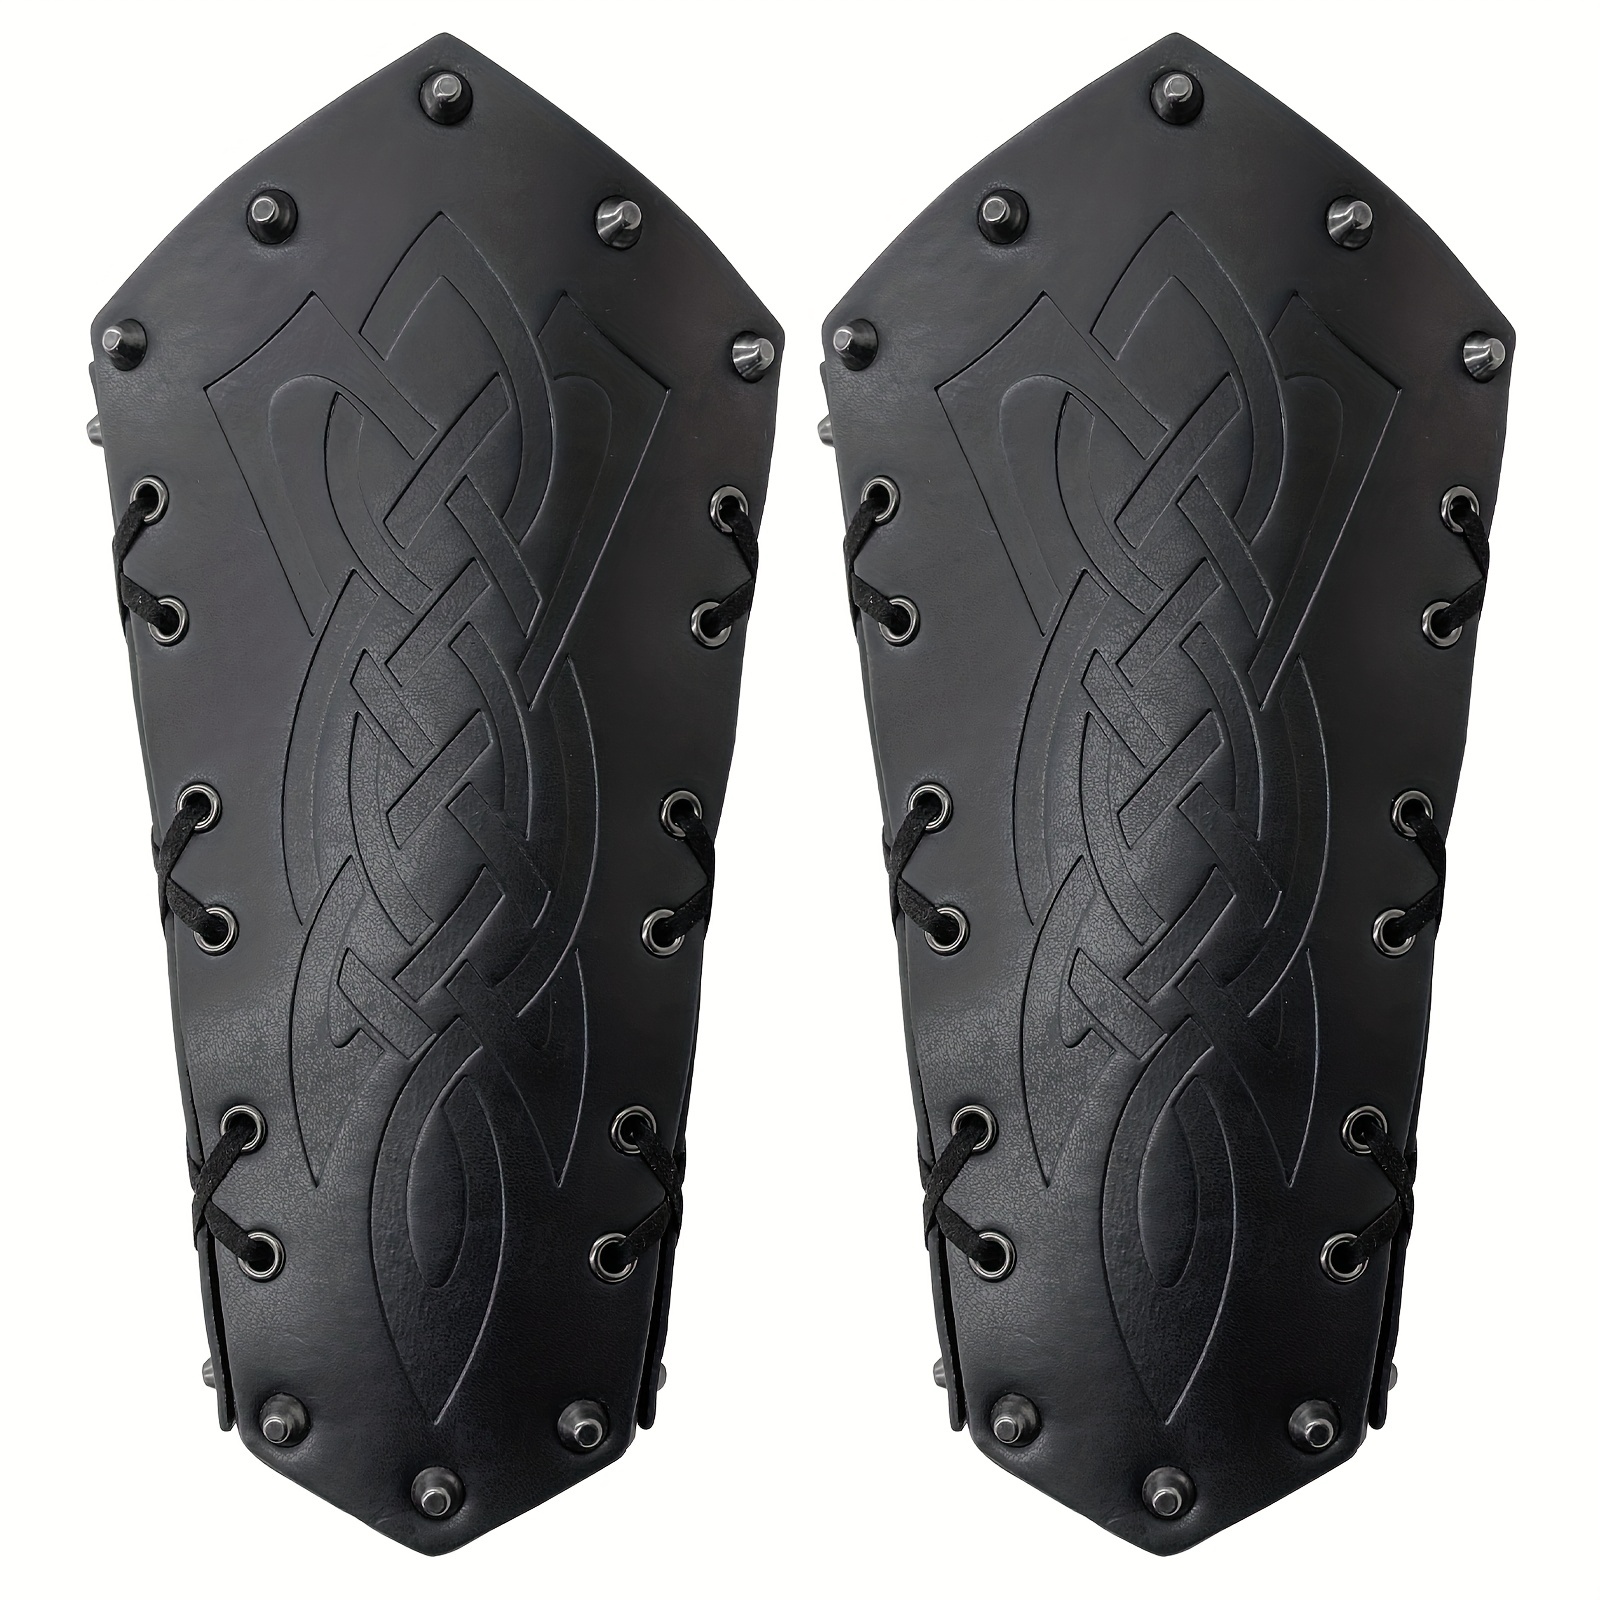 Medieval Arm Bracers Retro Pu Leather Knight Arm Guards Stage Performance  Costume Props, Free Shipping On Items Shipped From Temu